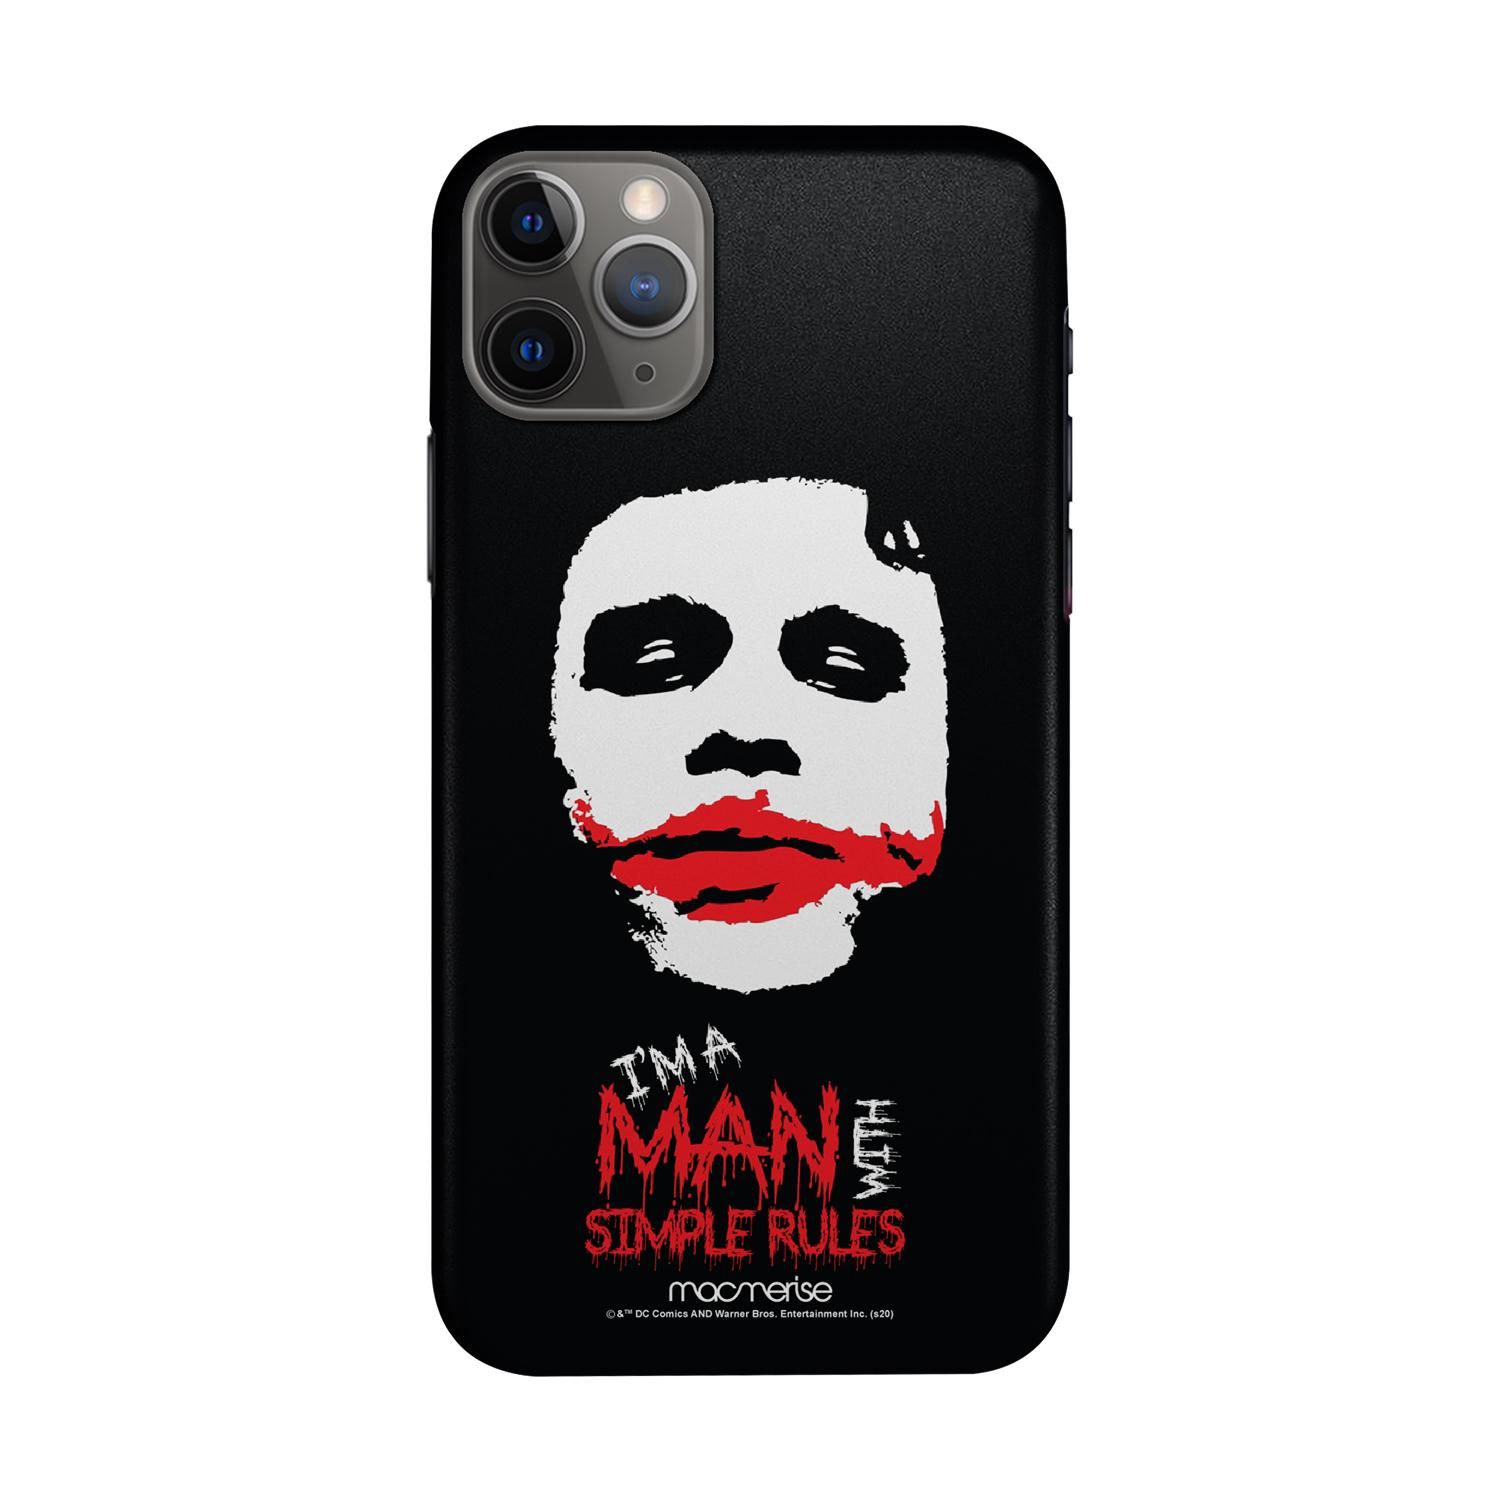 Man With Simple Rules - Sleek Phone Case for iPhone 11 Pro Max